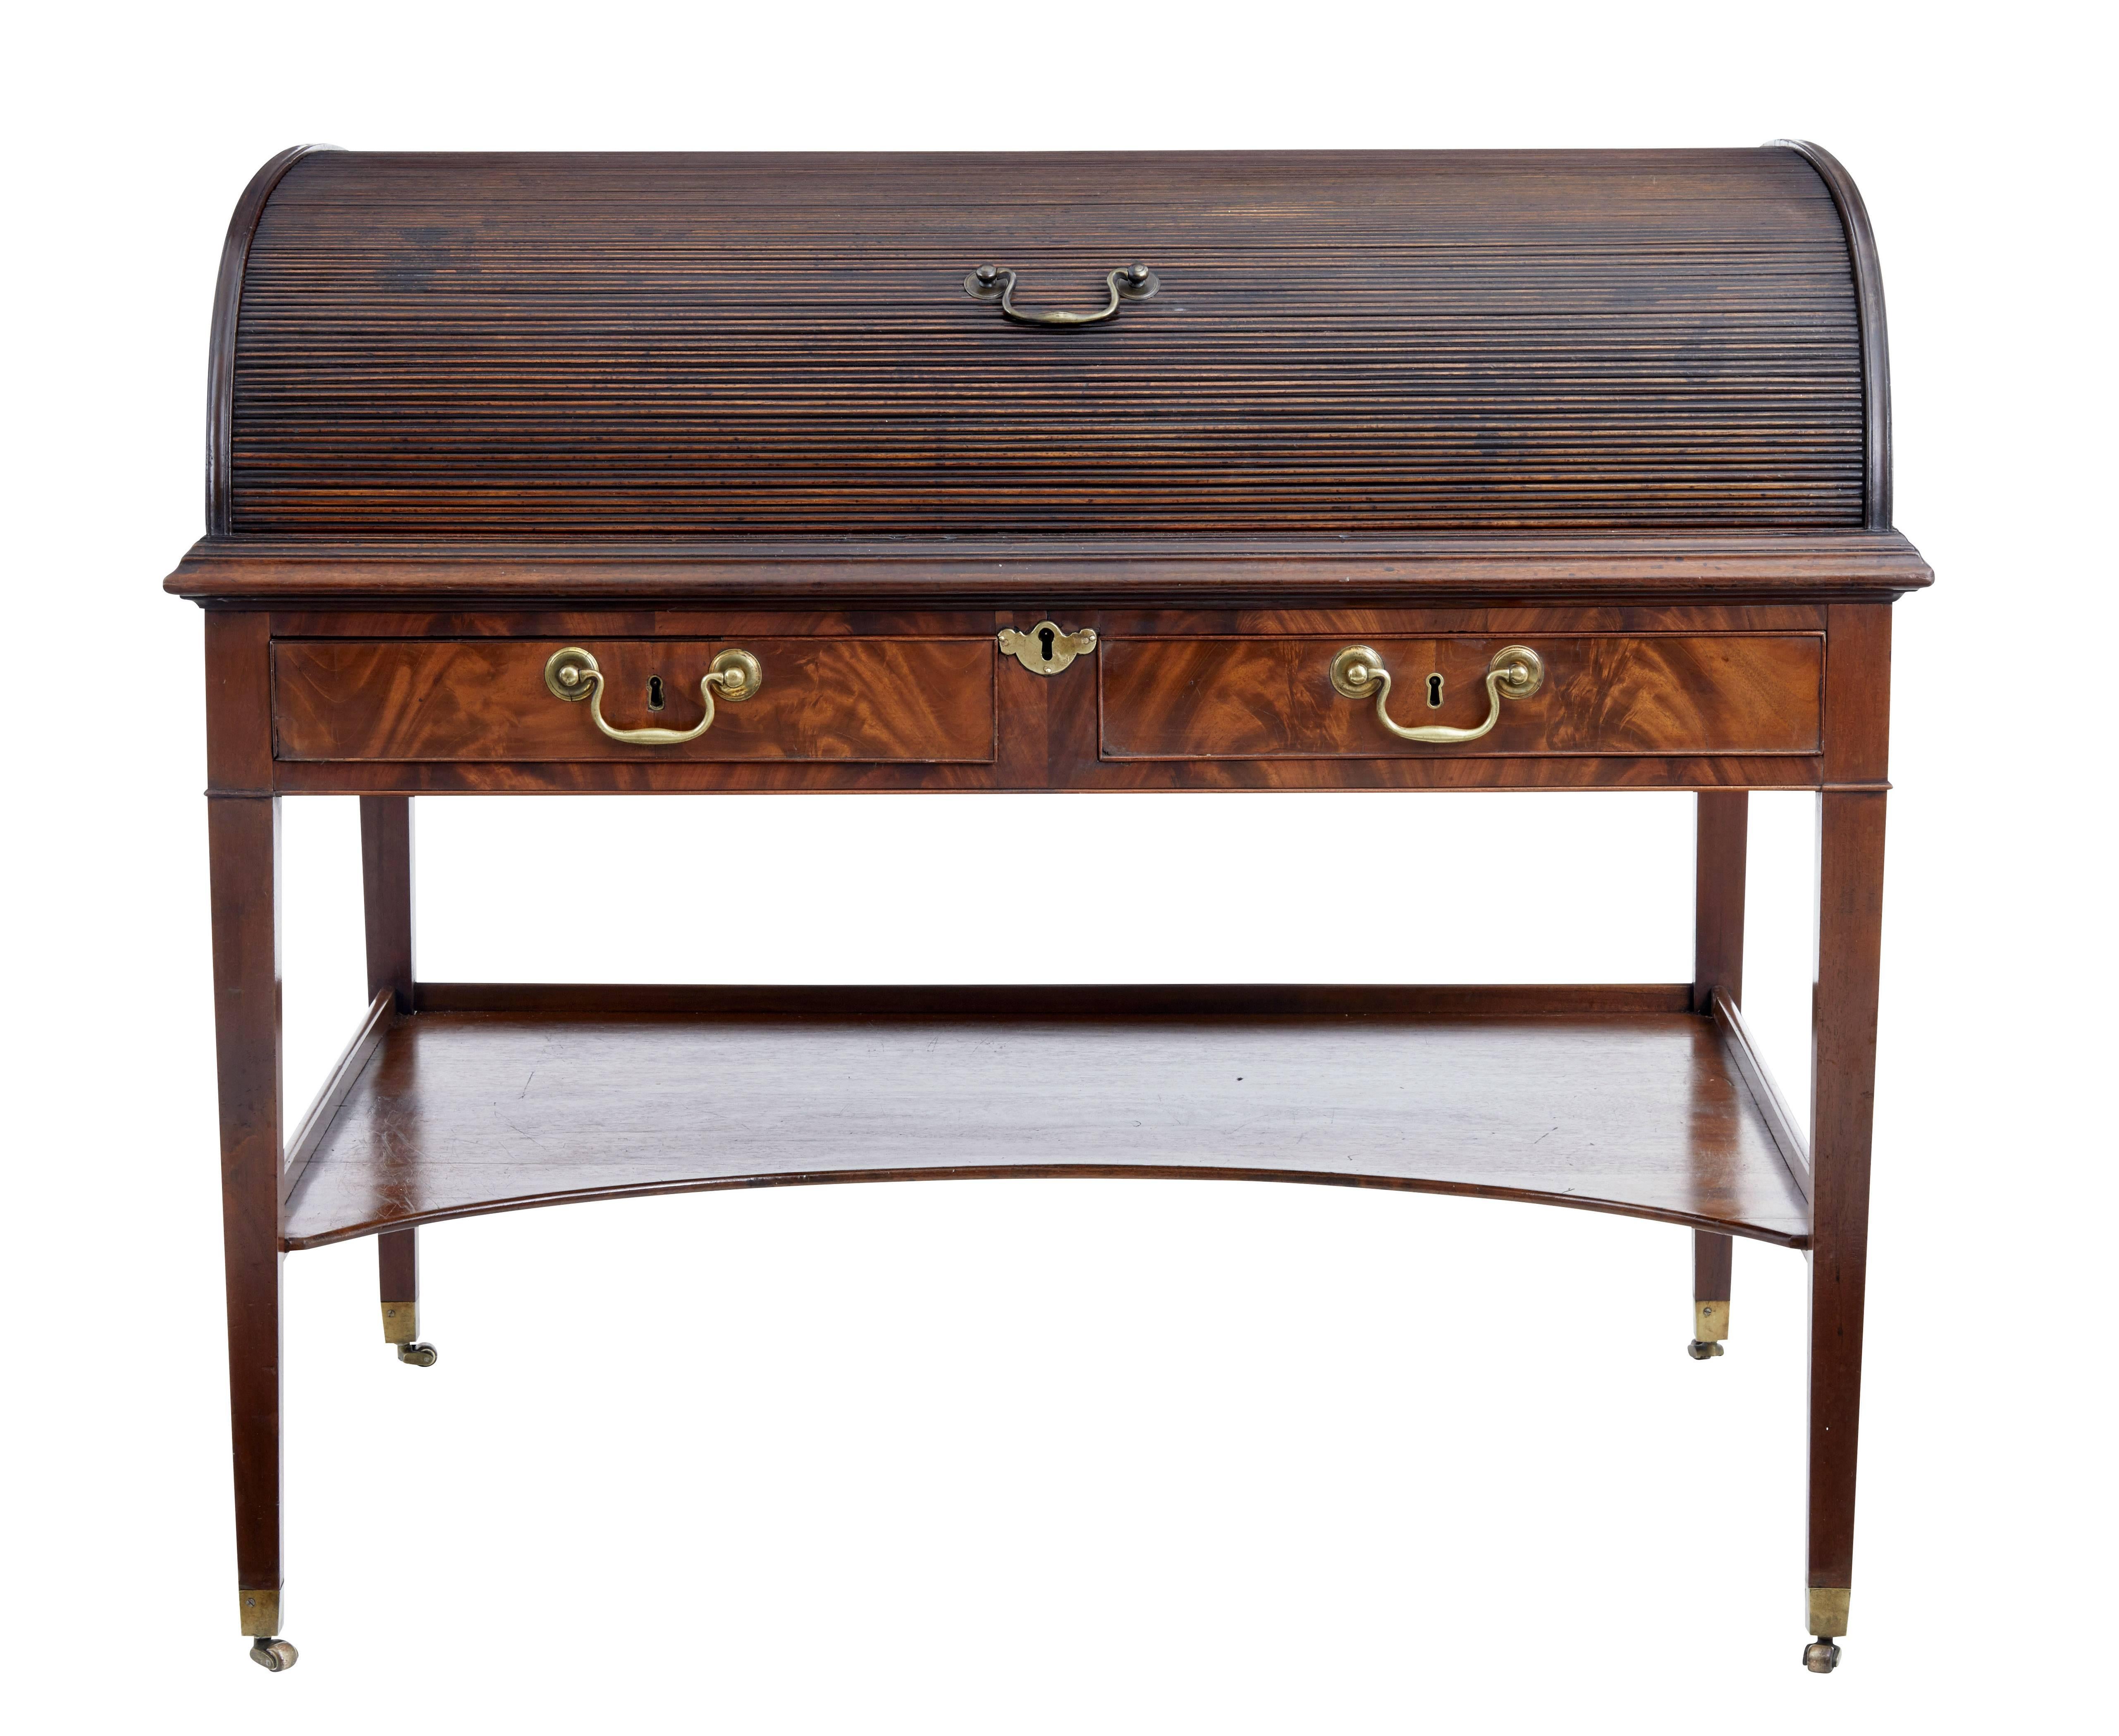 Ne quality English mahogany roll top desk, circa 1830.

Rare piece of English furniture we found on our travels to Sweden. Tambour roll top is in good working order. Top rolls back to reveal a fitted interior. Eight drawers, four of which are